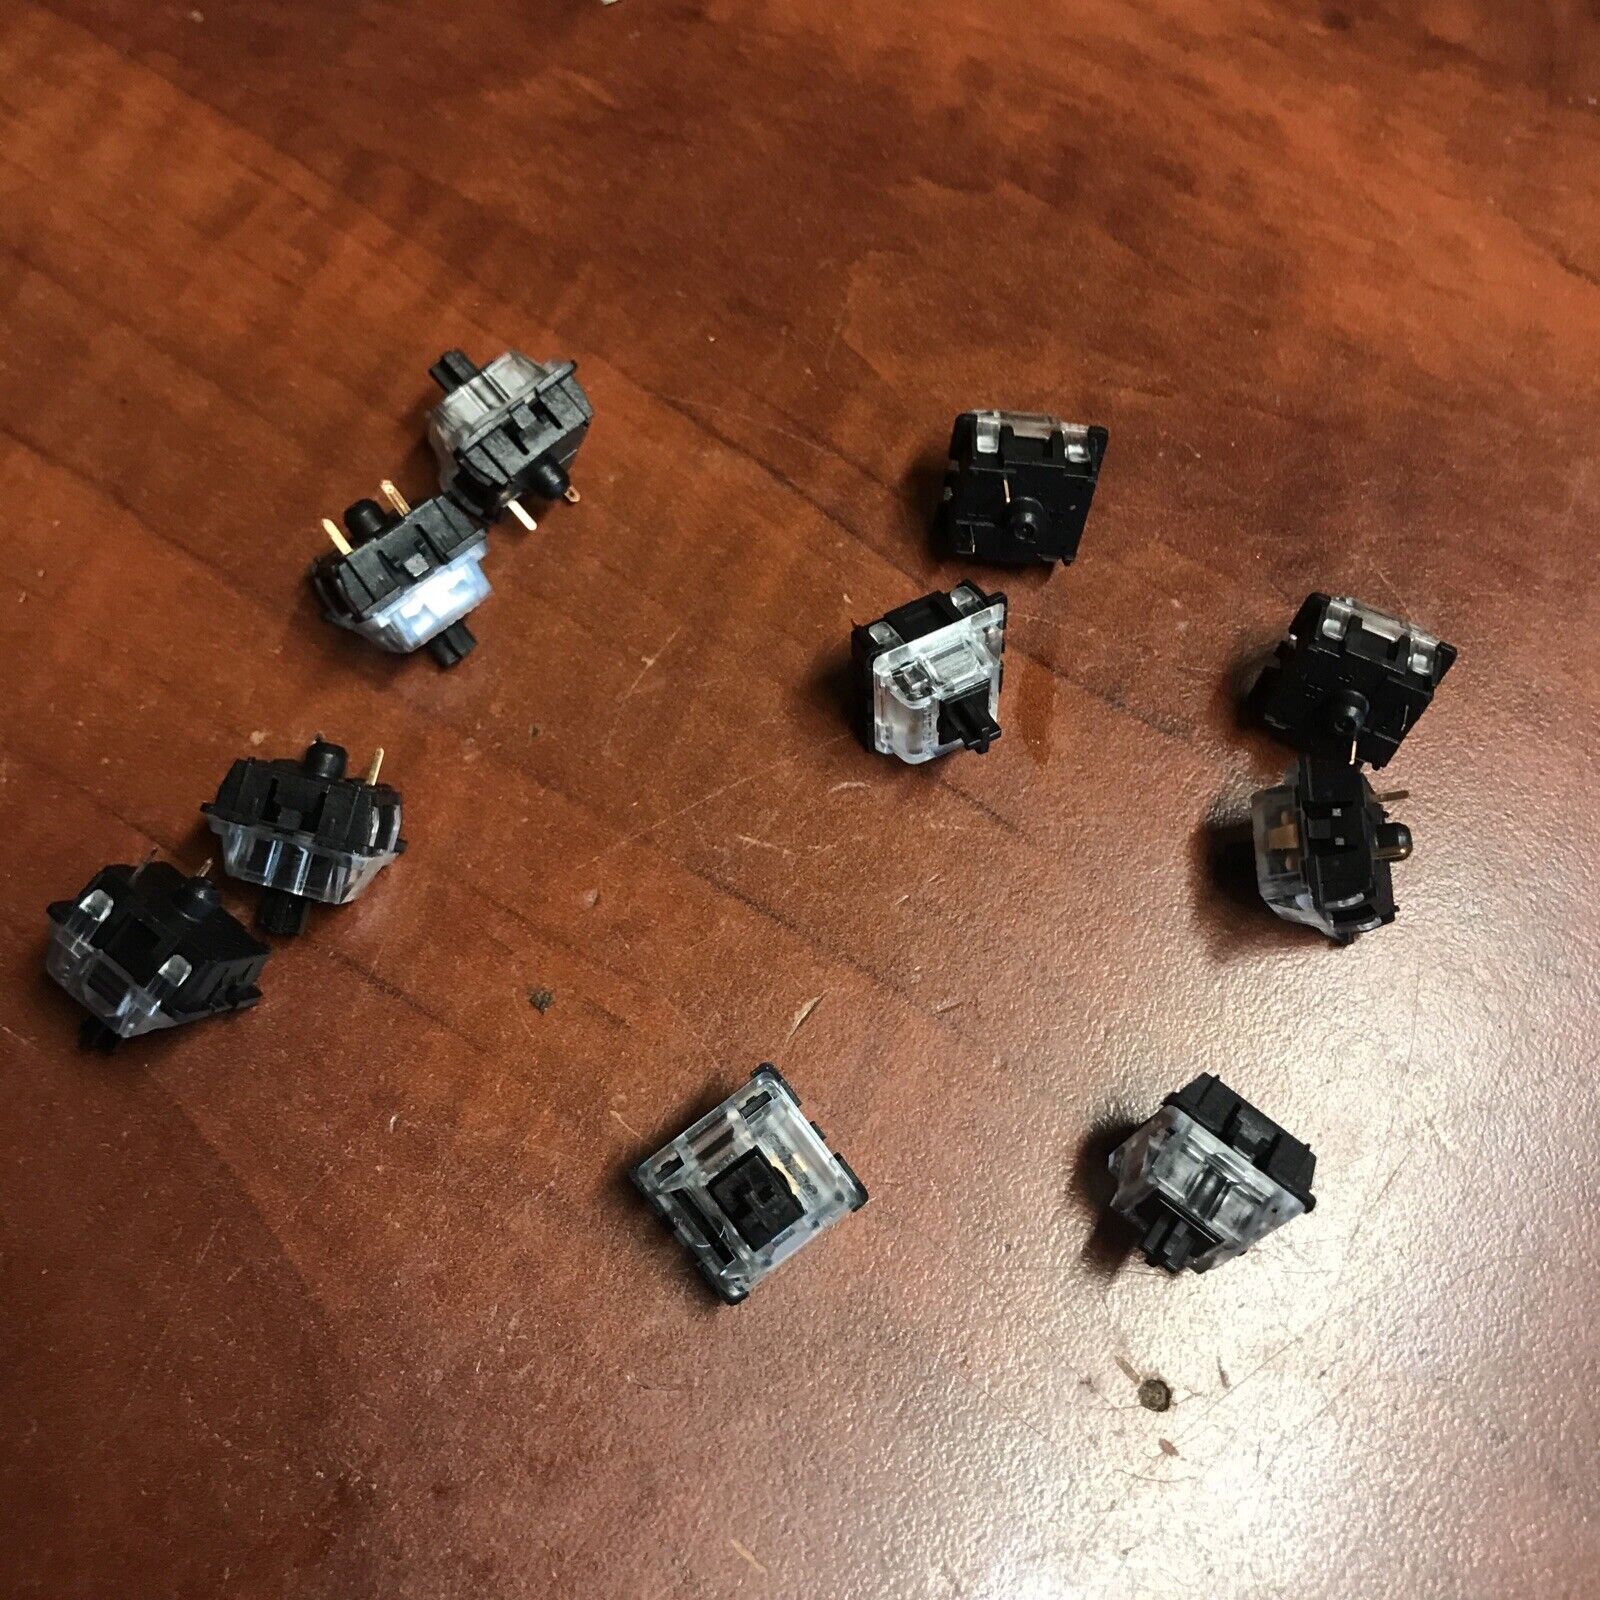 10x Pieces 2 Pin For Gateron MX Black RGB Mechanical Keyboard Switches Lot